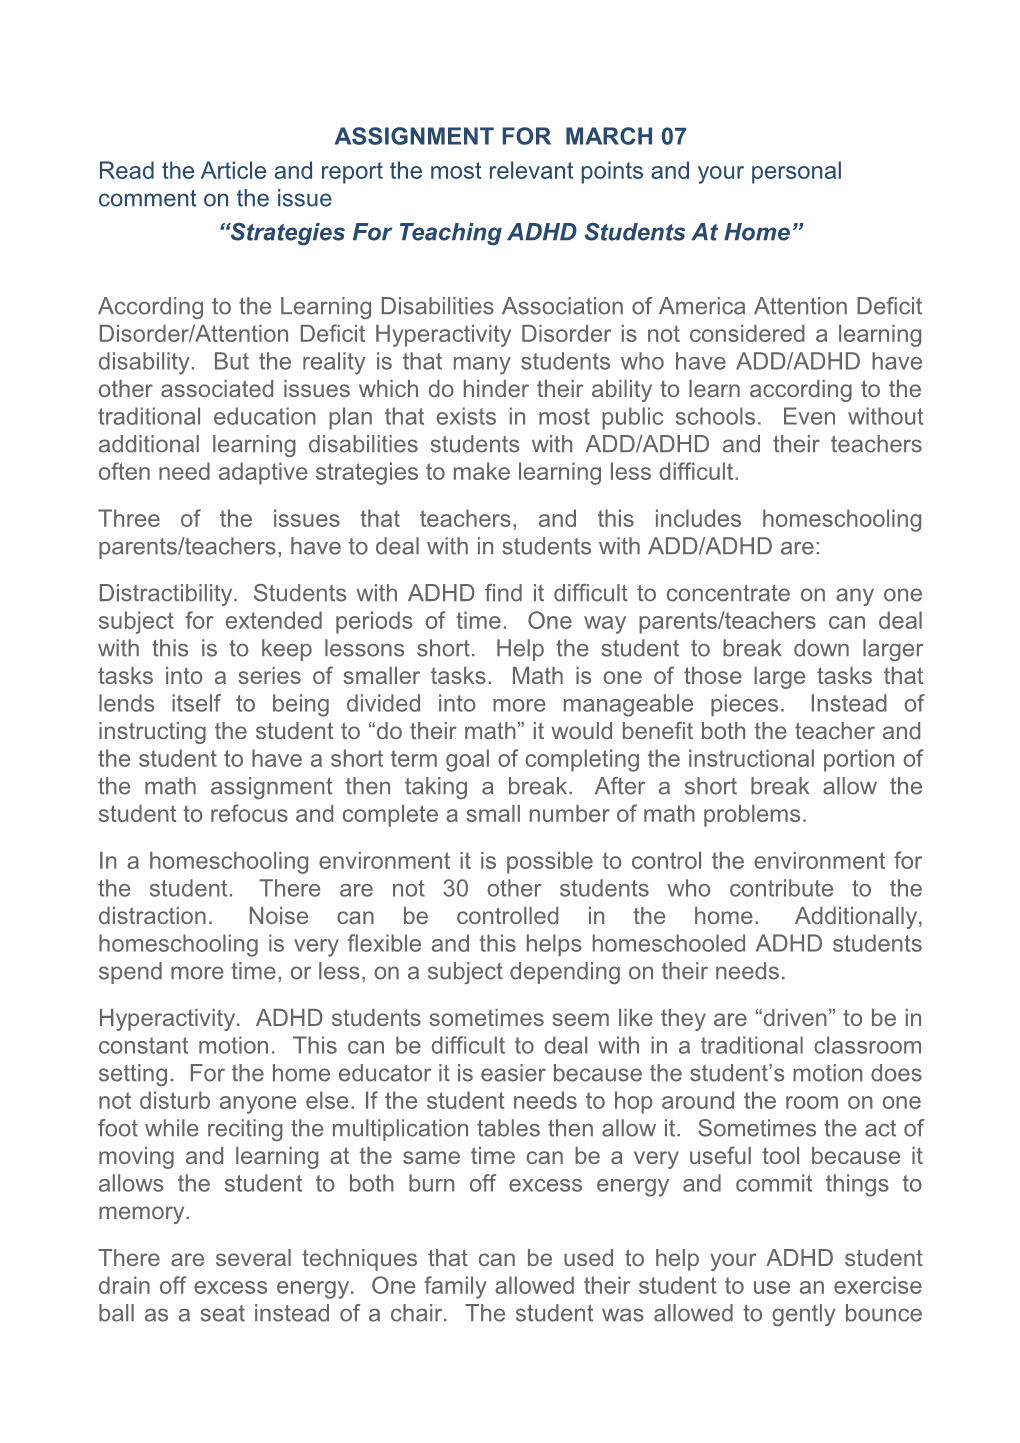 Strategies for Teaching ADHD Students at Home